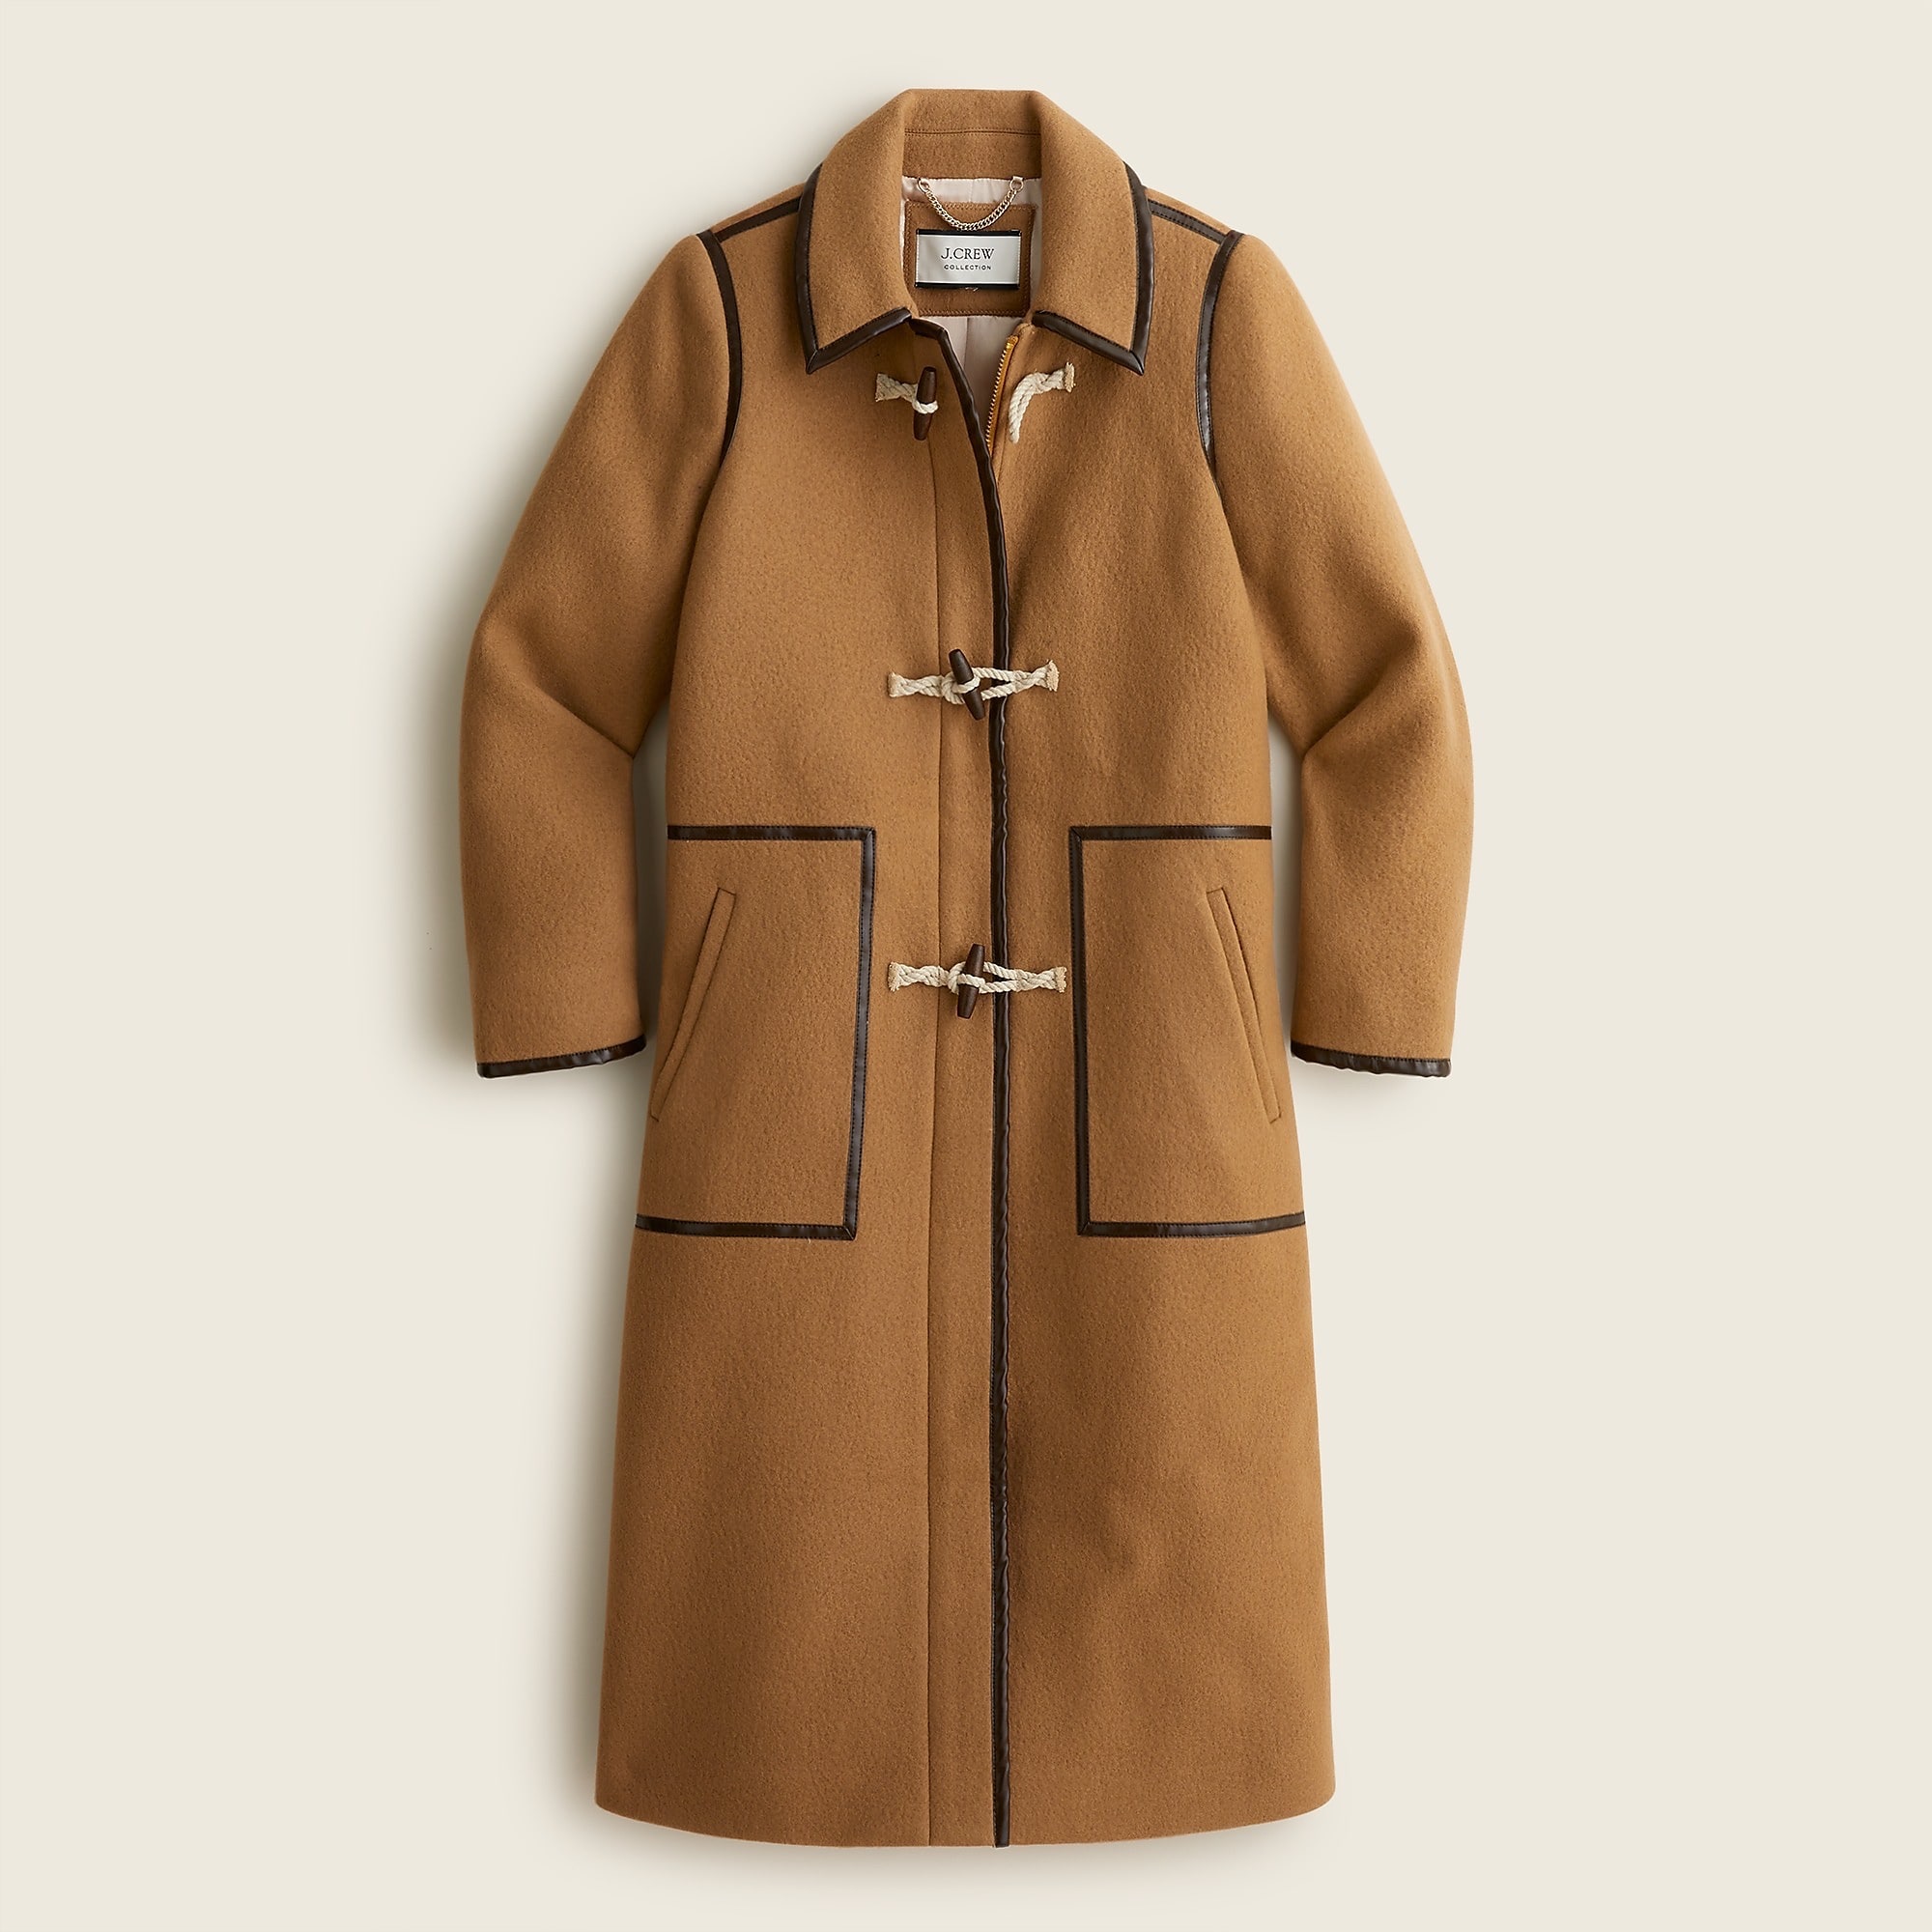 J.Crew: Collection Toggle Coat In Italian Fall Blanket Wool For Women 羊毛羊绒大衣